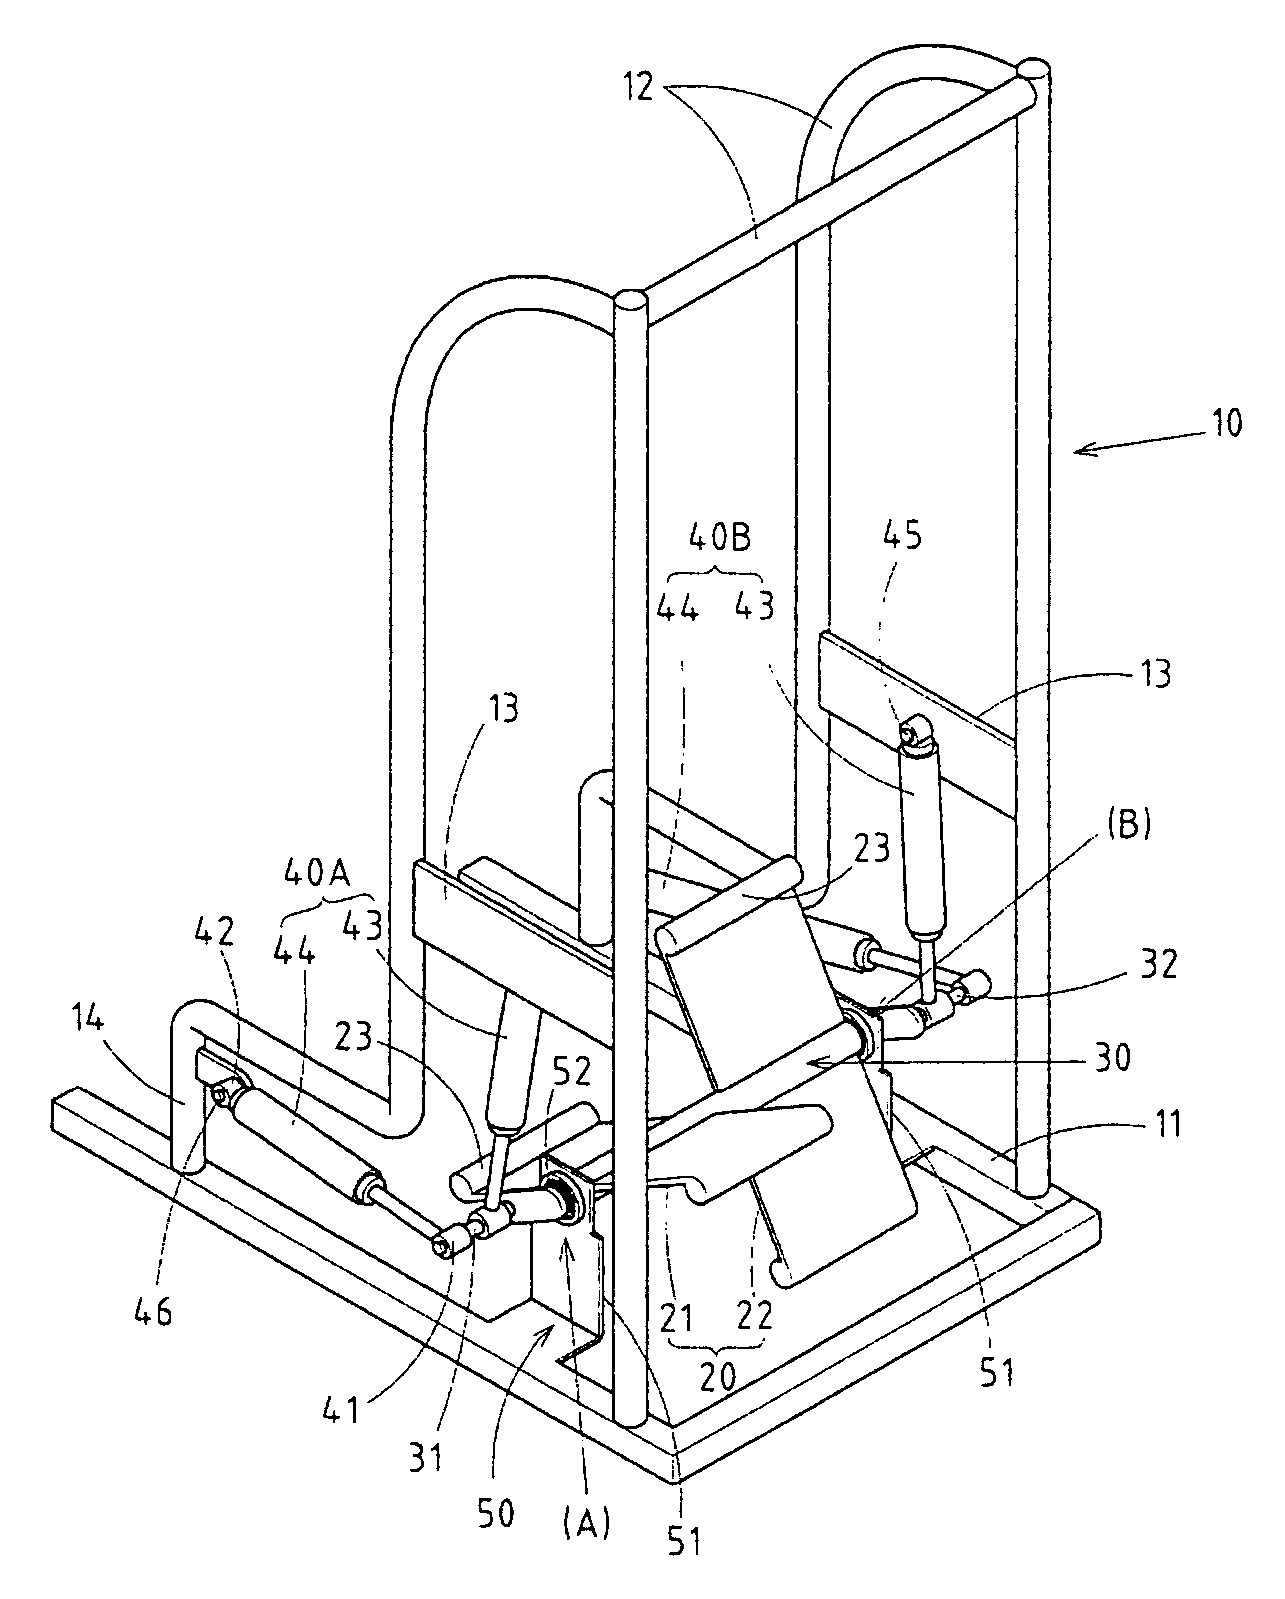 Stationary apparatus for doing exercise imitating the act of mountain climbing